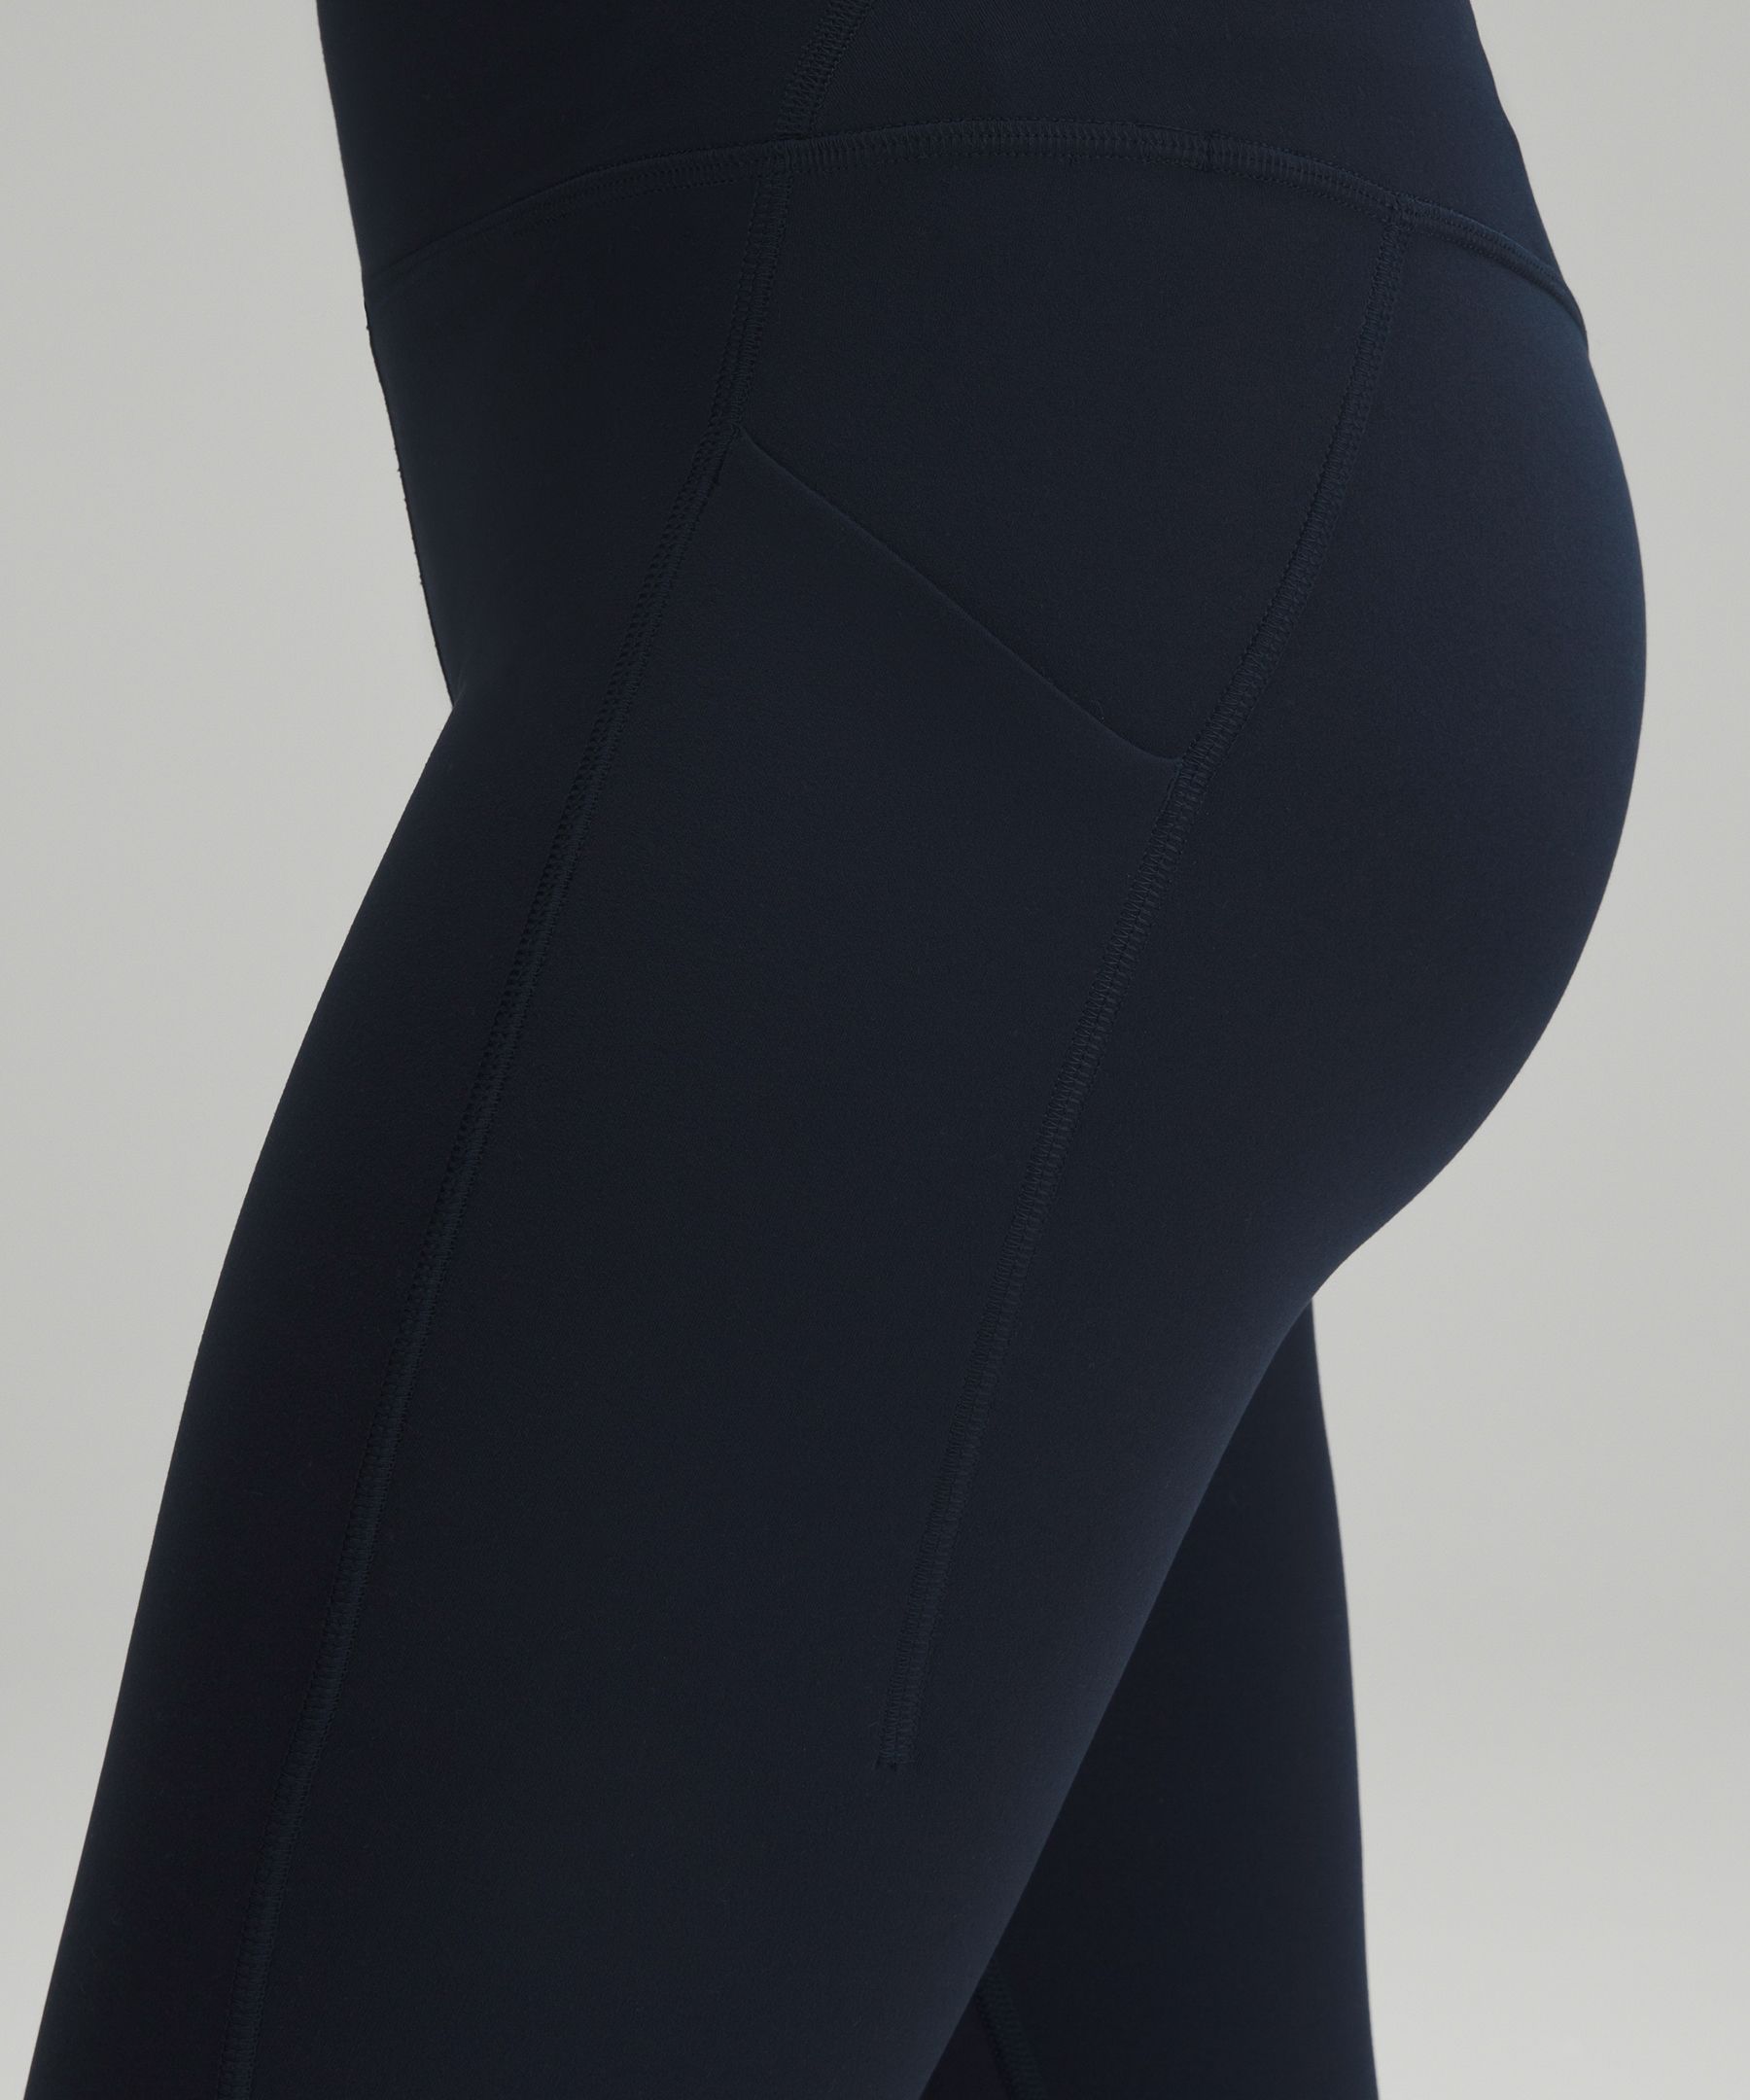 Lululemon black leggings with pockets Size 2 - $88 (20% Off Retail) - From  Faith